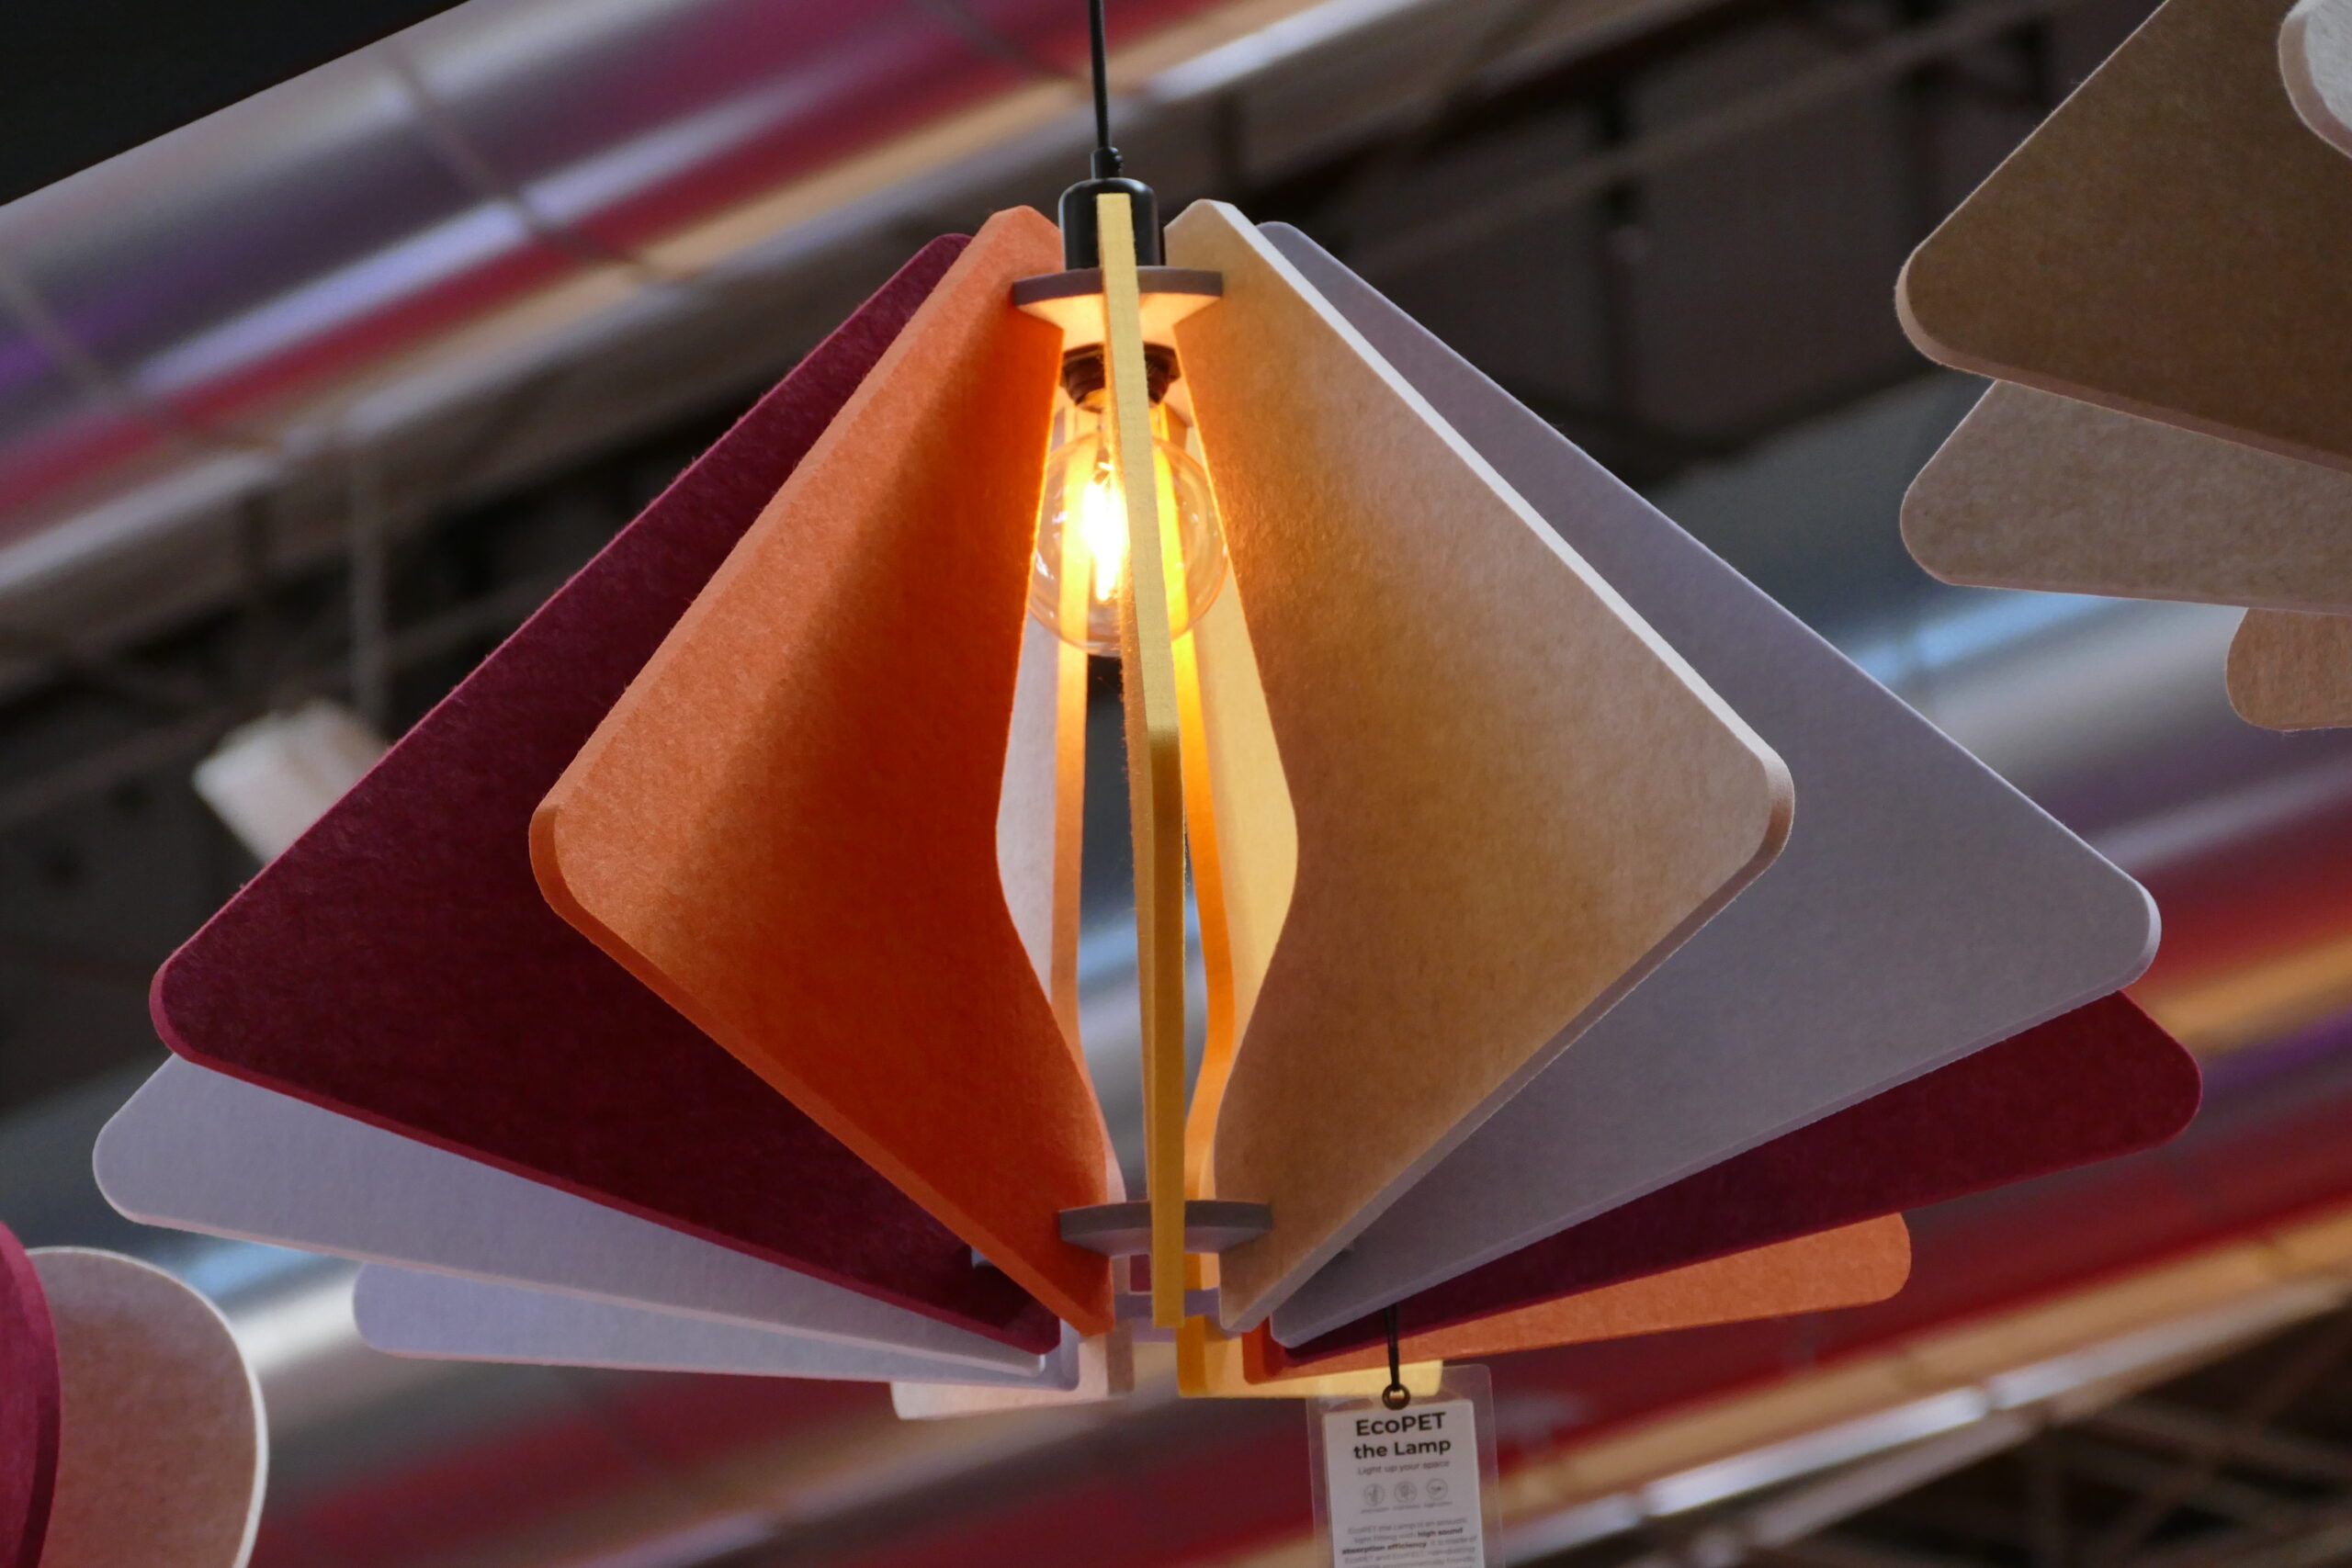 Sound absorbing light fitting in large size at Batimat 2022